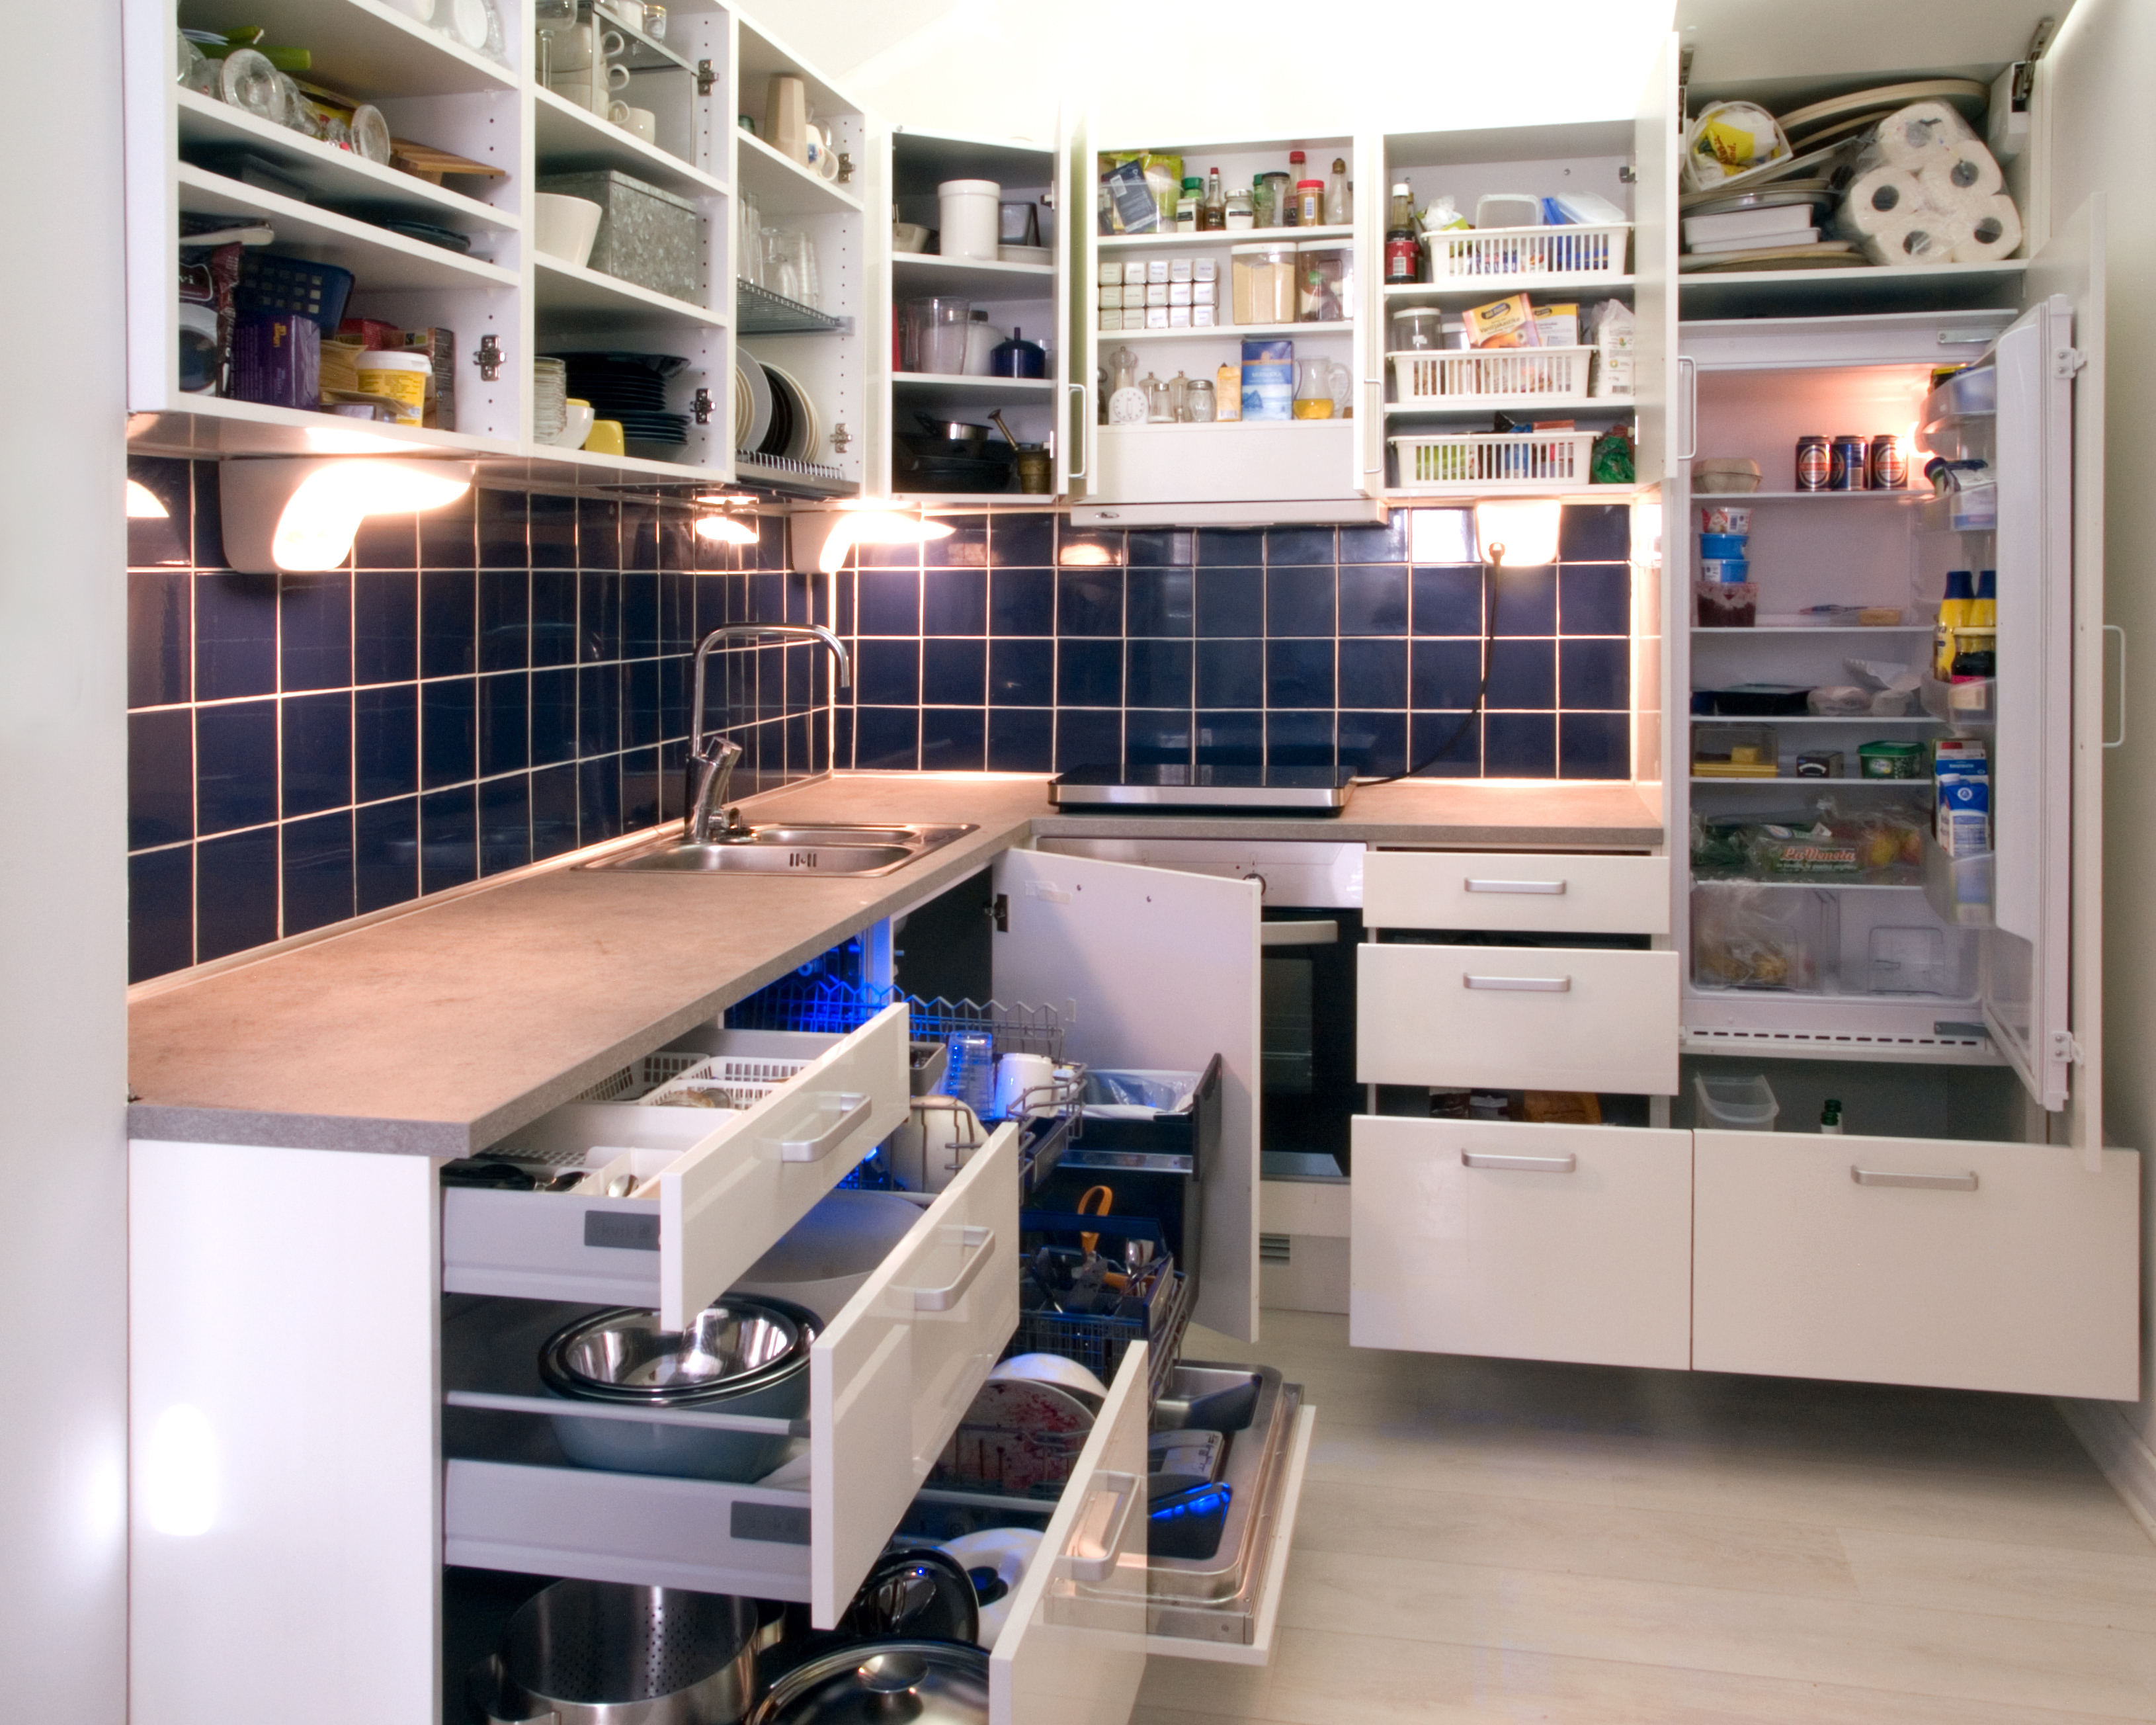 File:White kitchen with cabinet doors and drawers opened or removed so that  real-life stuff can be seen in cabinets.jpg - Wikimedia Commons